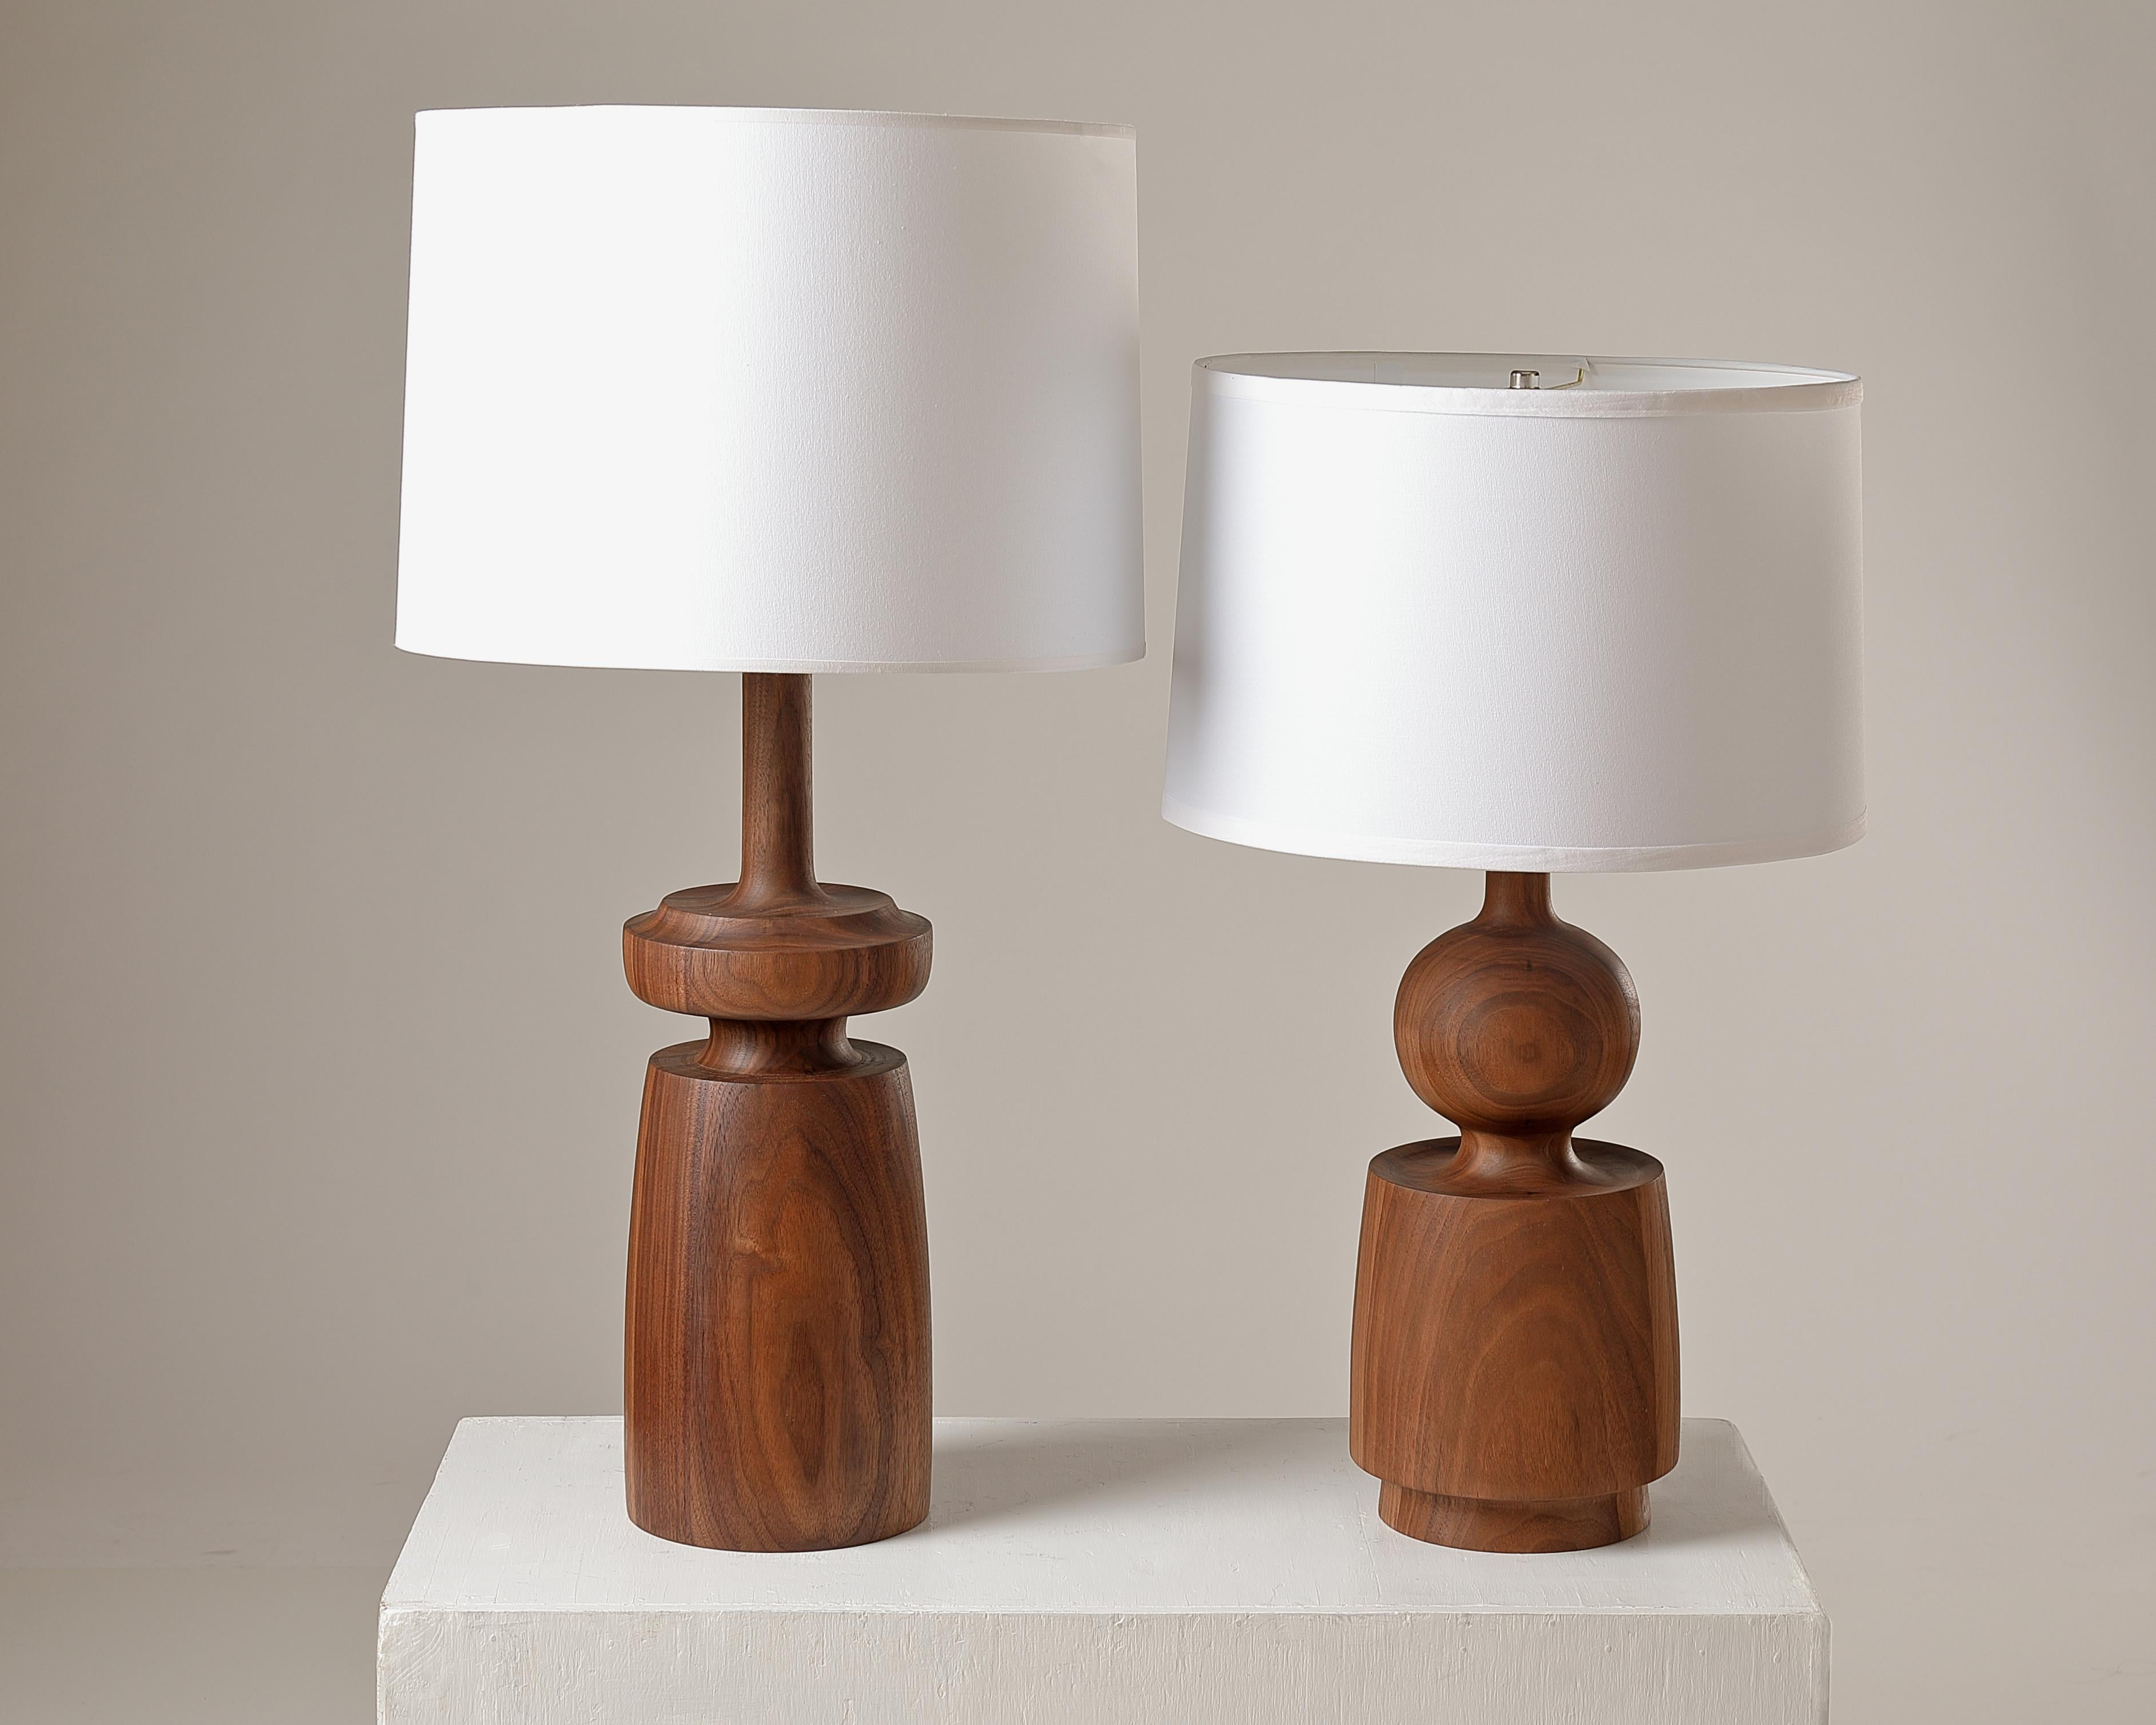 American Craftsman Lathe turned walnut table lamp form TWLB by Michael Rozell, USA 2023